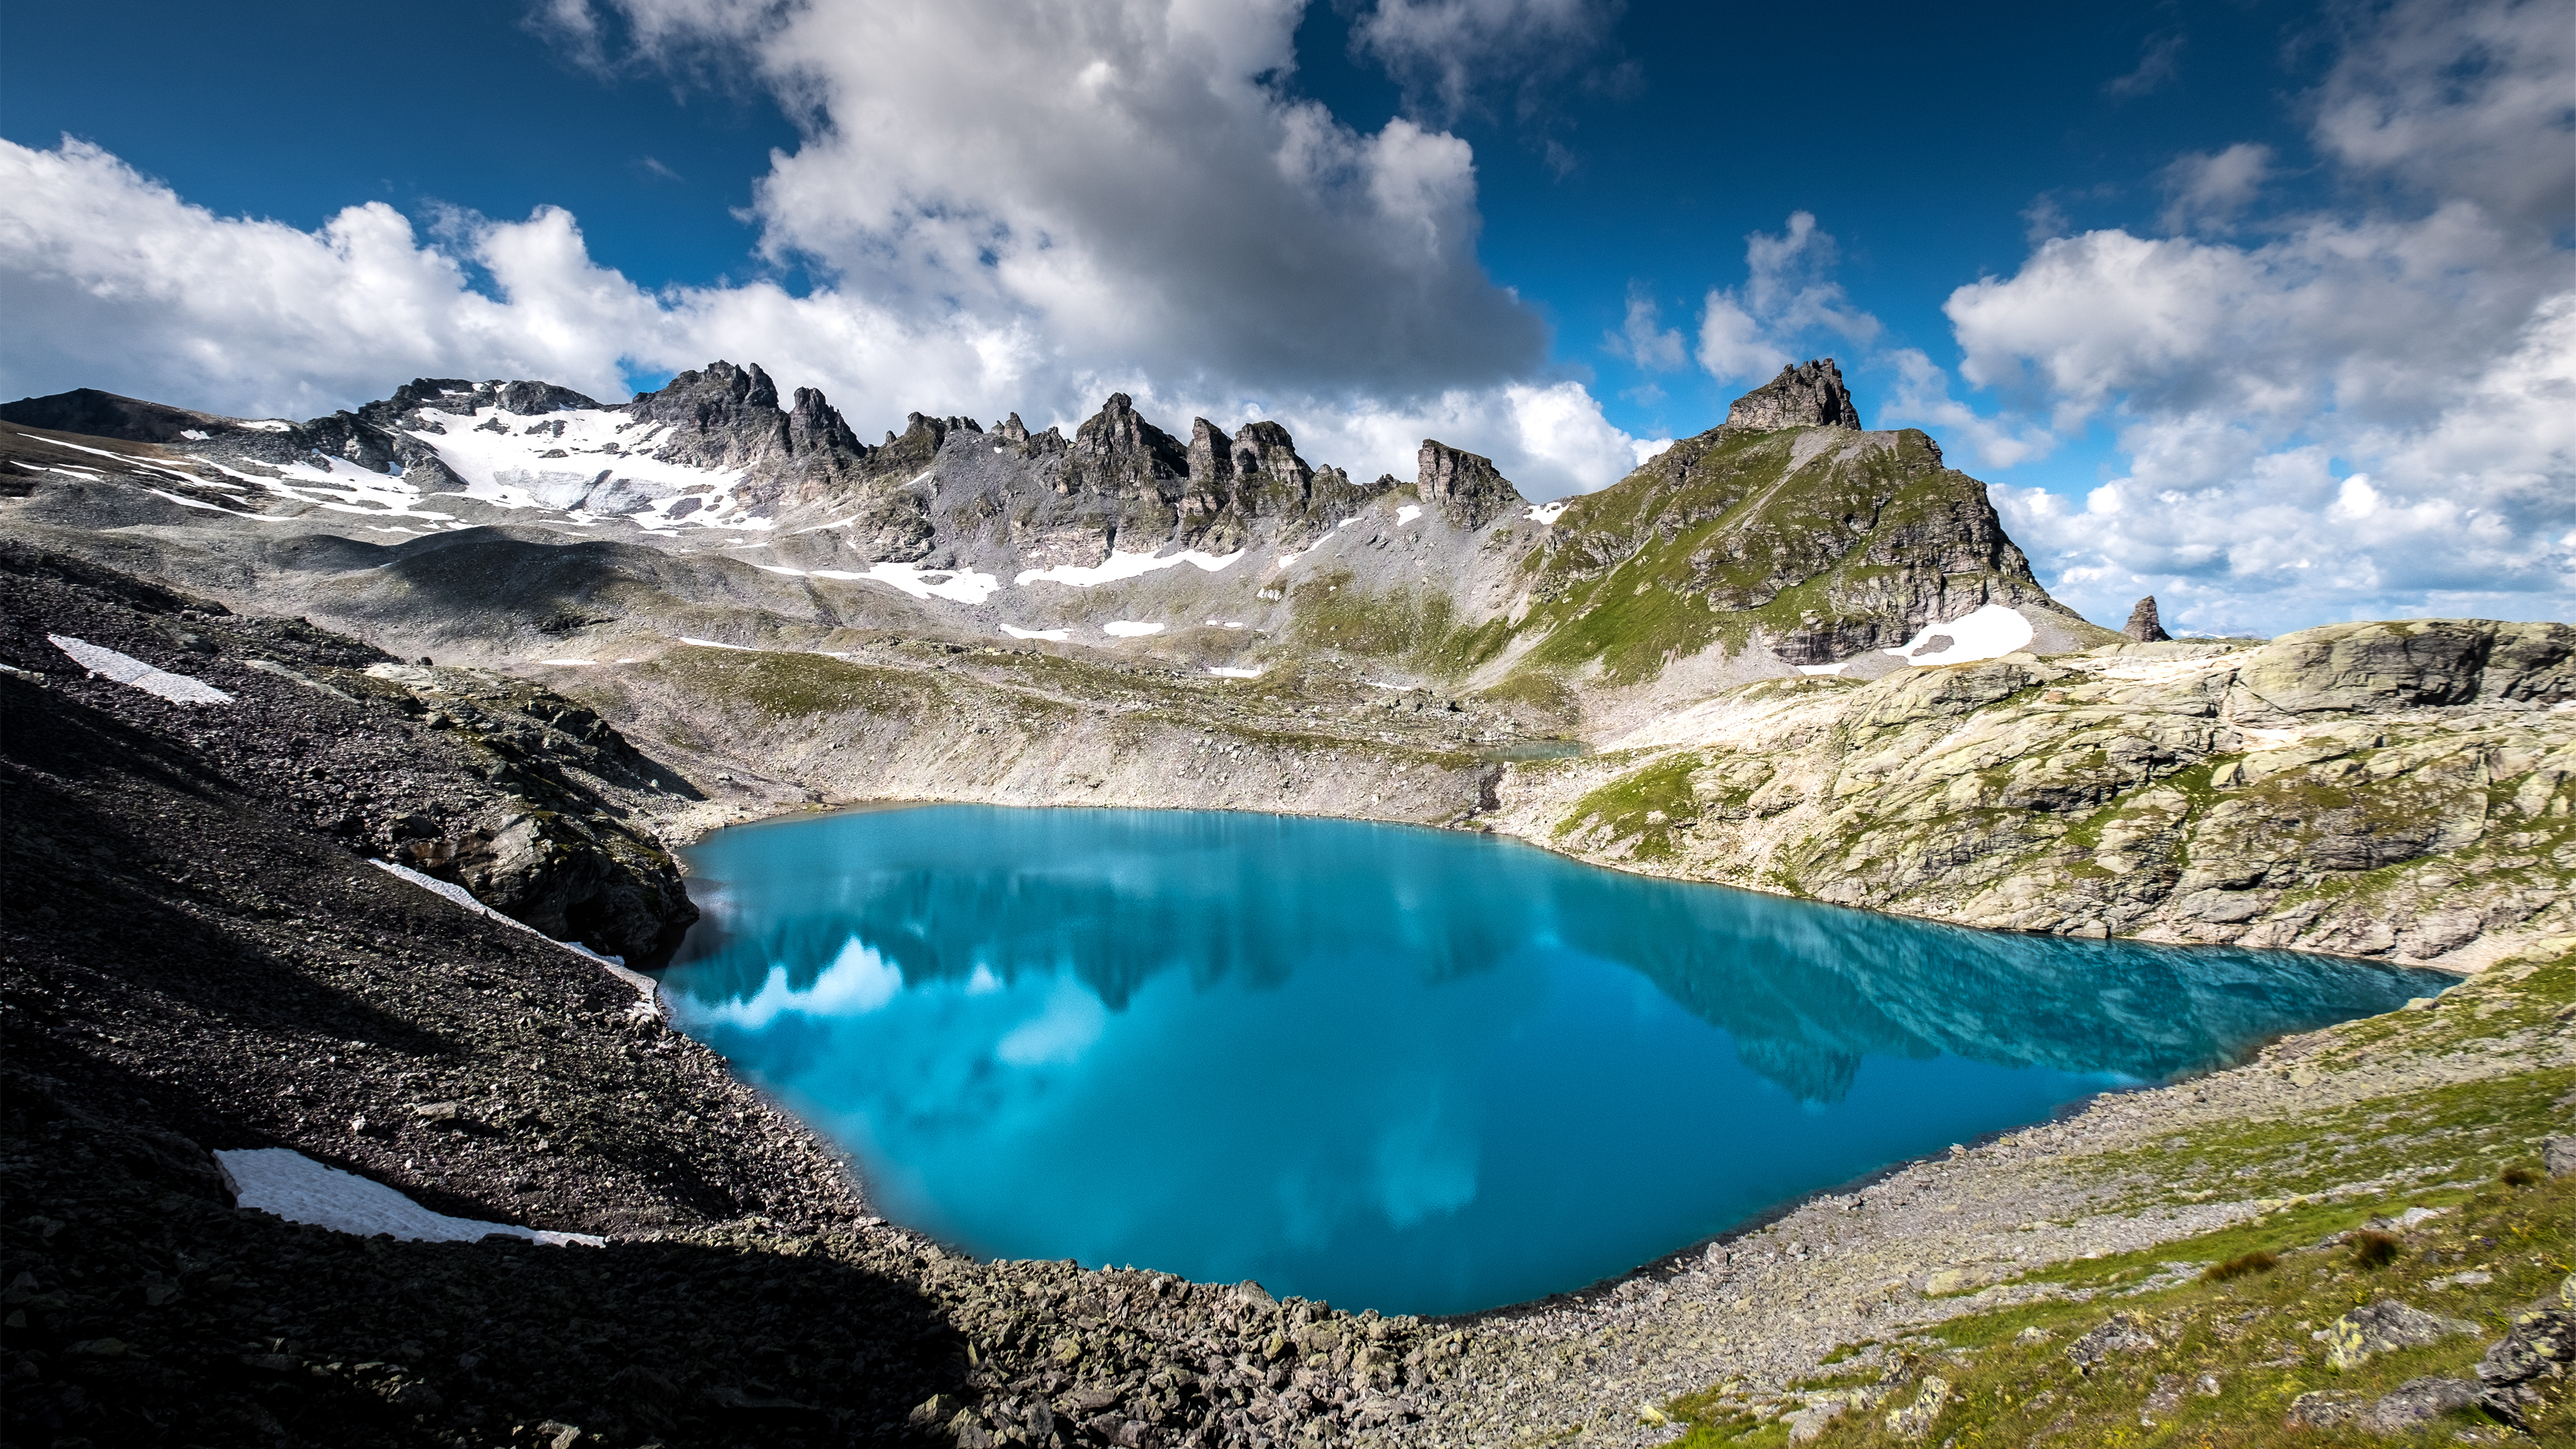 General 3840x2160 photography nature lake mountains landscape clouds Alps Switzerland 4K reflection water sky